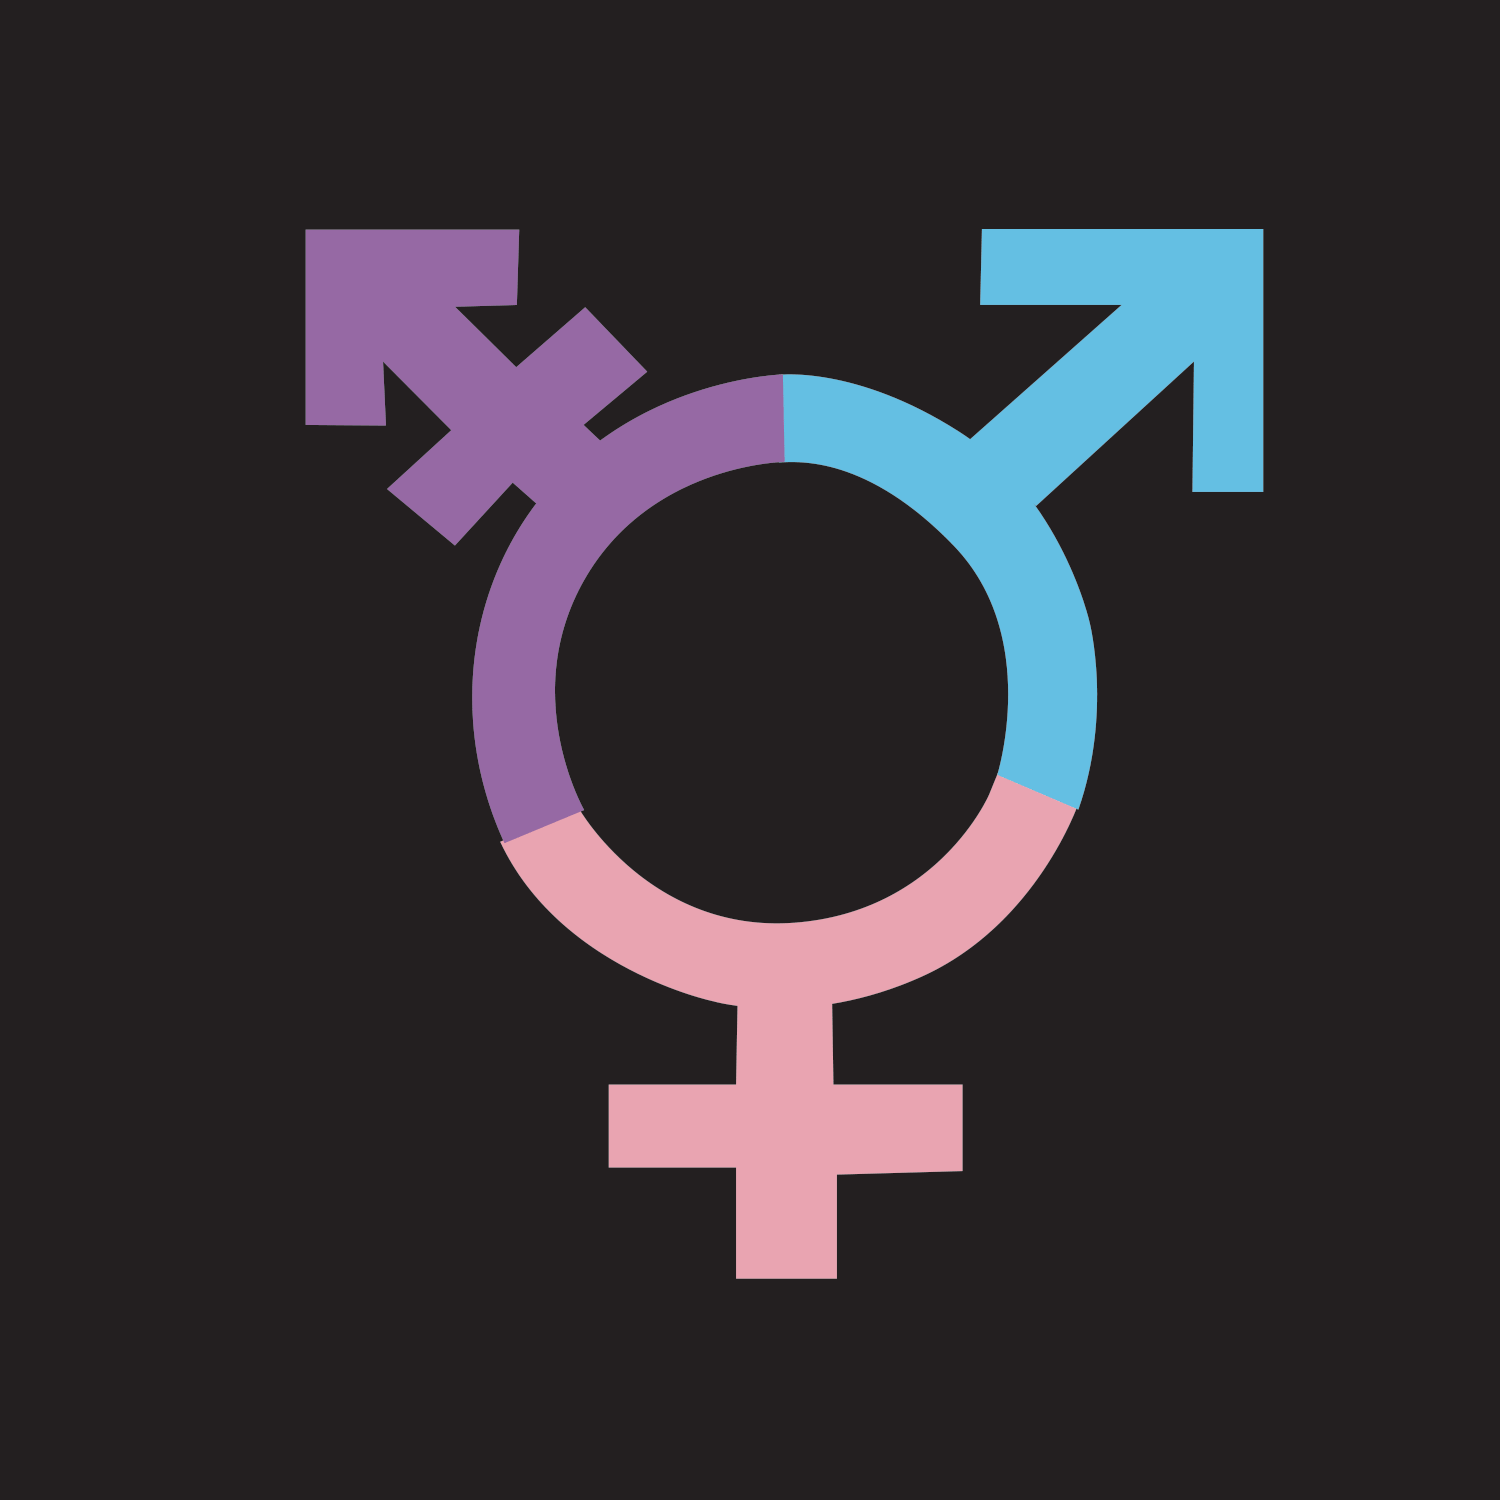 Gif reading "No state shall deprive any person of life, liberty or property without due process of law" with multiple gender symbols interconnected.